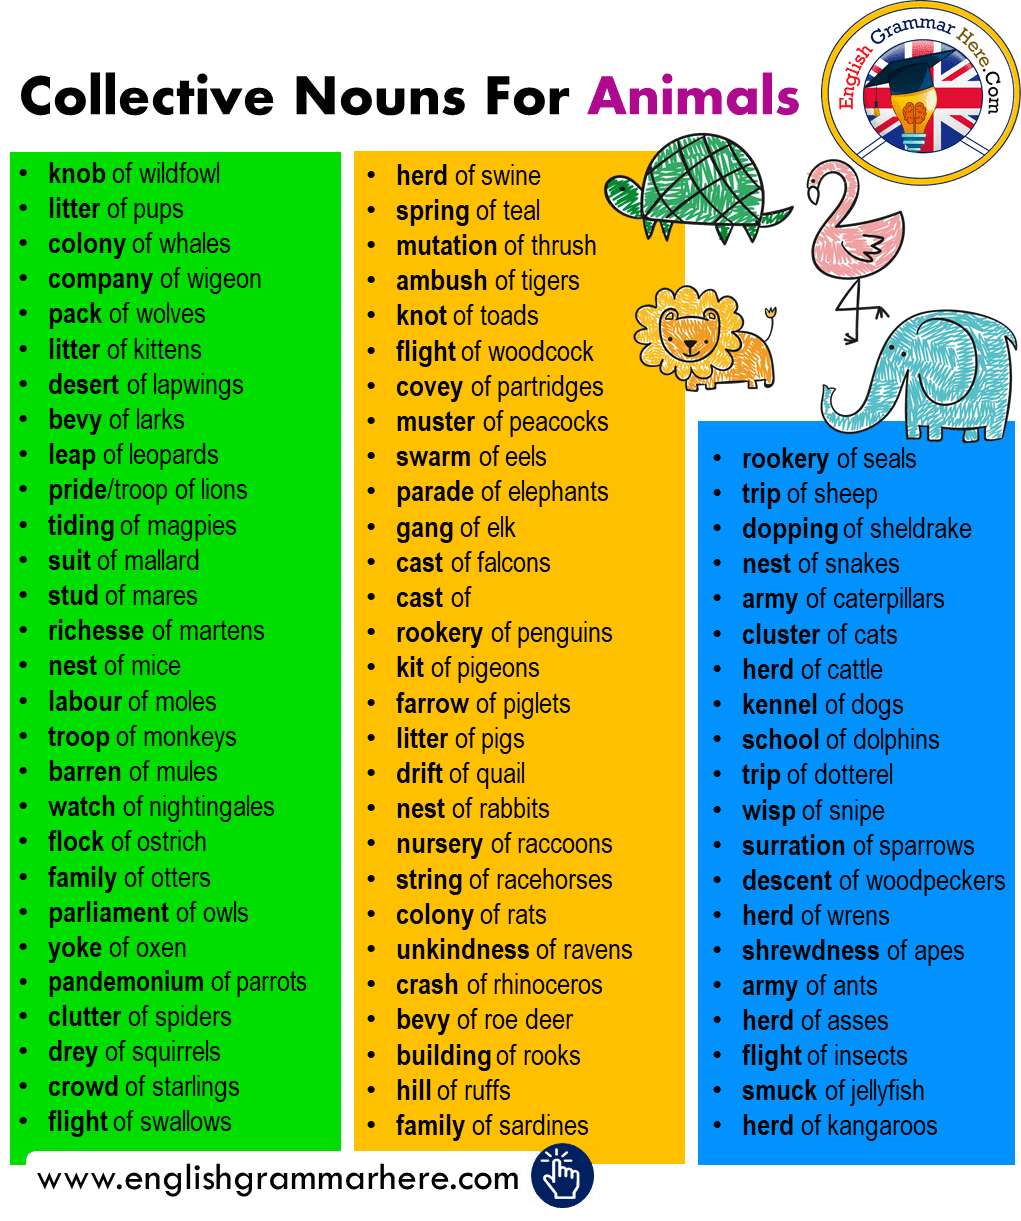 Found this helpful list of collective animal nouns